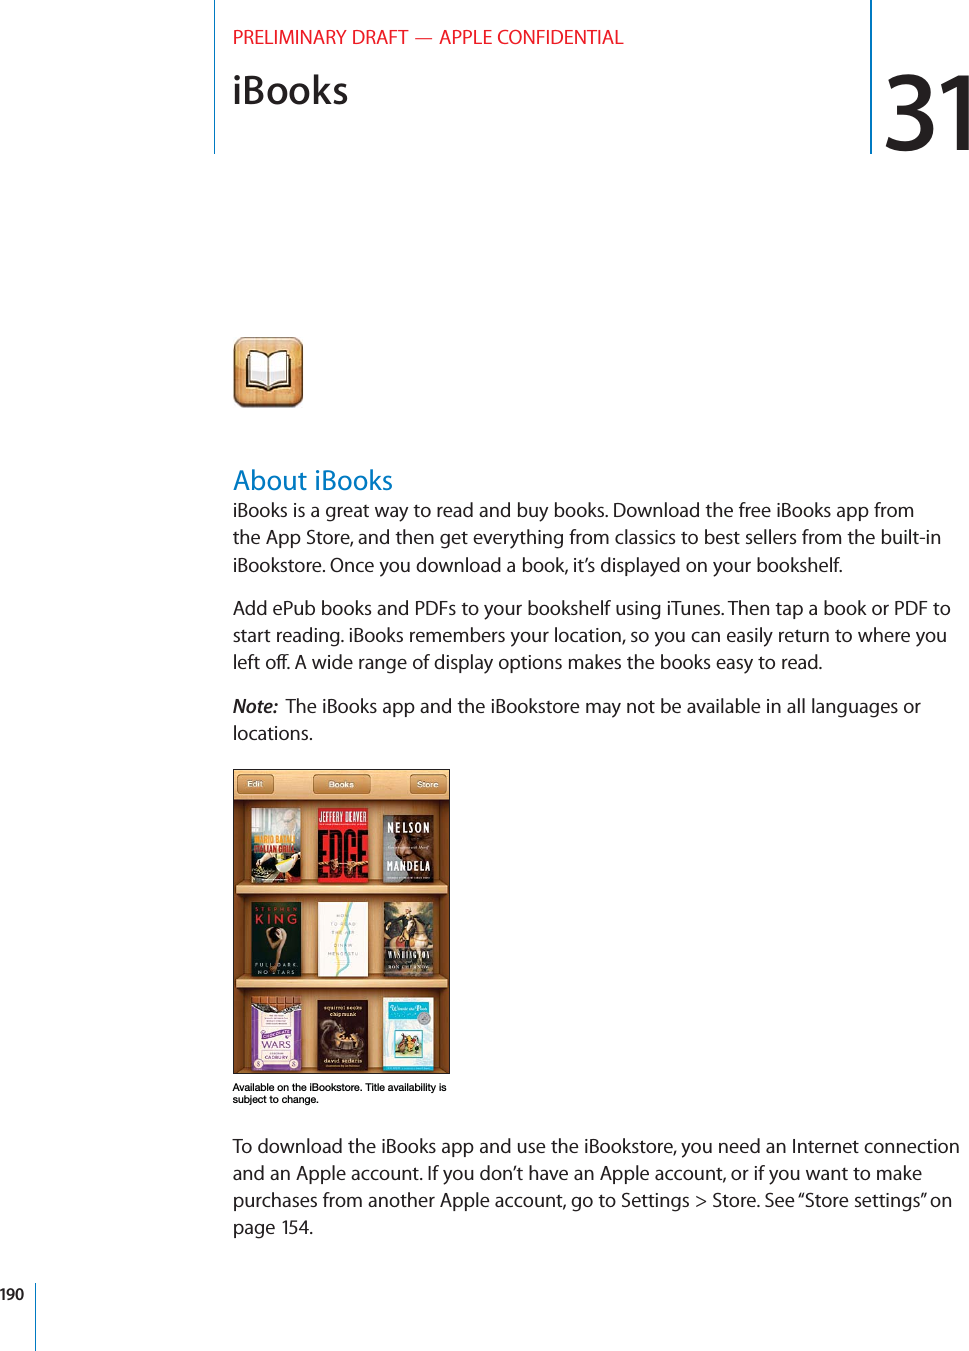 iBooks 31PRELIMINARY DRAFT — APPLE CONFIDENTIALAbout iBooksiBooks is a great way to read and buy books. Download the free iBooks app from the App Store, and then get everything from classics to best sellers from the built-in iBookstore. Once you download a book, it’s displayed on your bookshelf. Add ePub books and PDFs to your bookshelf using iTunes. Then tap a book or PDF to start reading. iBooks remembers your location, so you can easily return to where you left o∂. A wide range of display options makes the books easy to read.Note:  The iBooks app and the iBookstore may not be available in all languages or locations.To download the iBooks app and use the iBookstore, you need an Internet connection and an Apple account. If you don’t have an Apple account, or if you want to make purchases from another Apple account, go to Settings &gt; Store. See “Store settings” on page 154.190